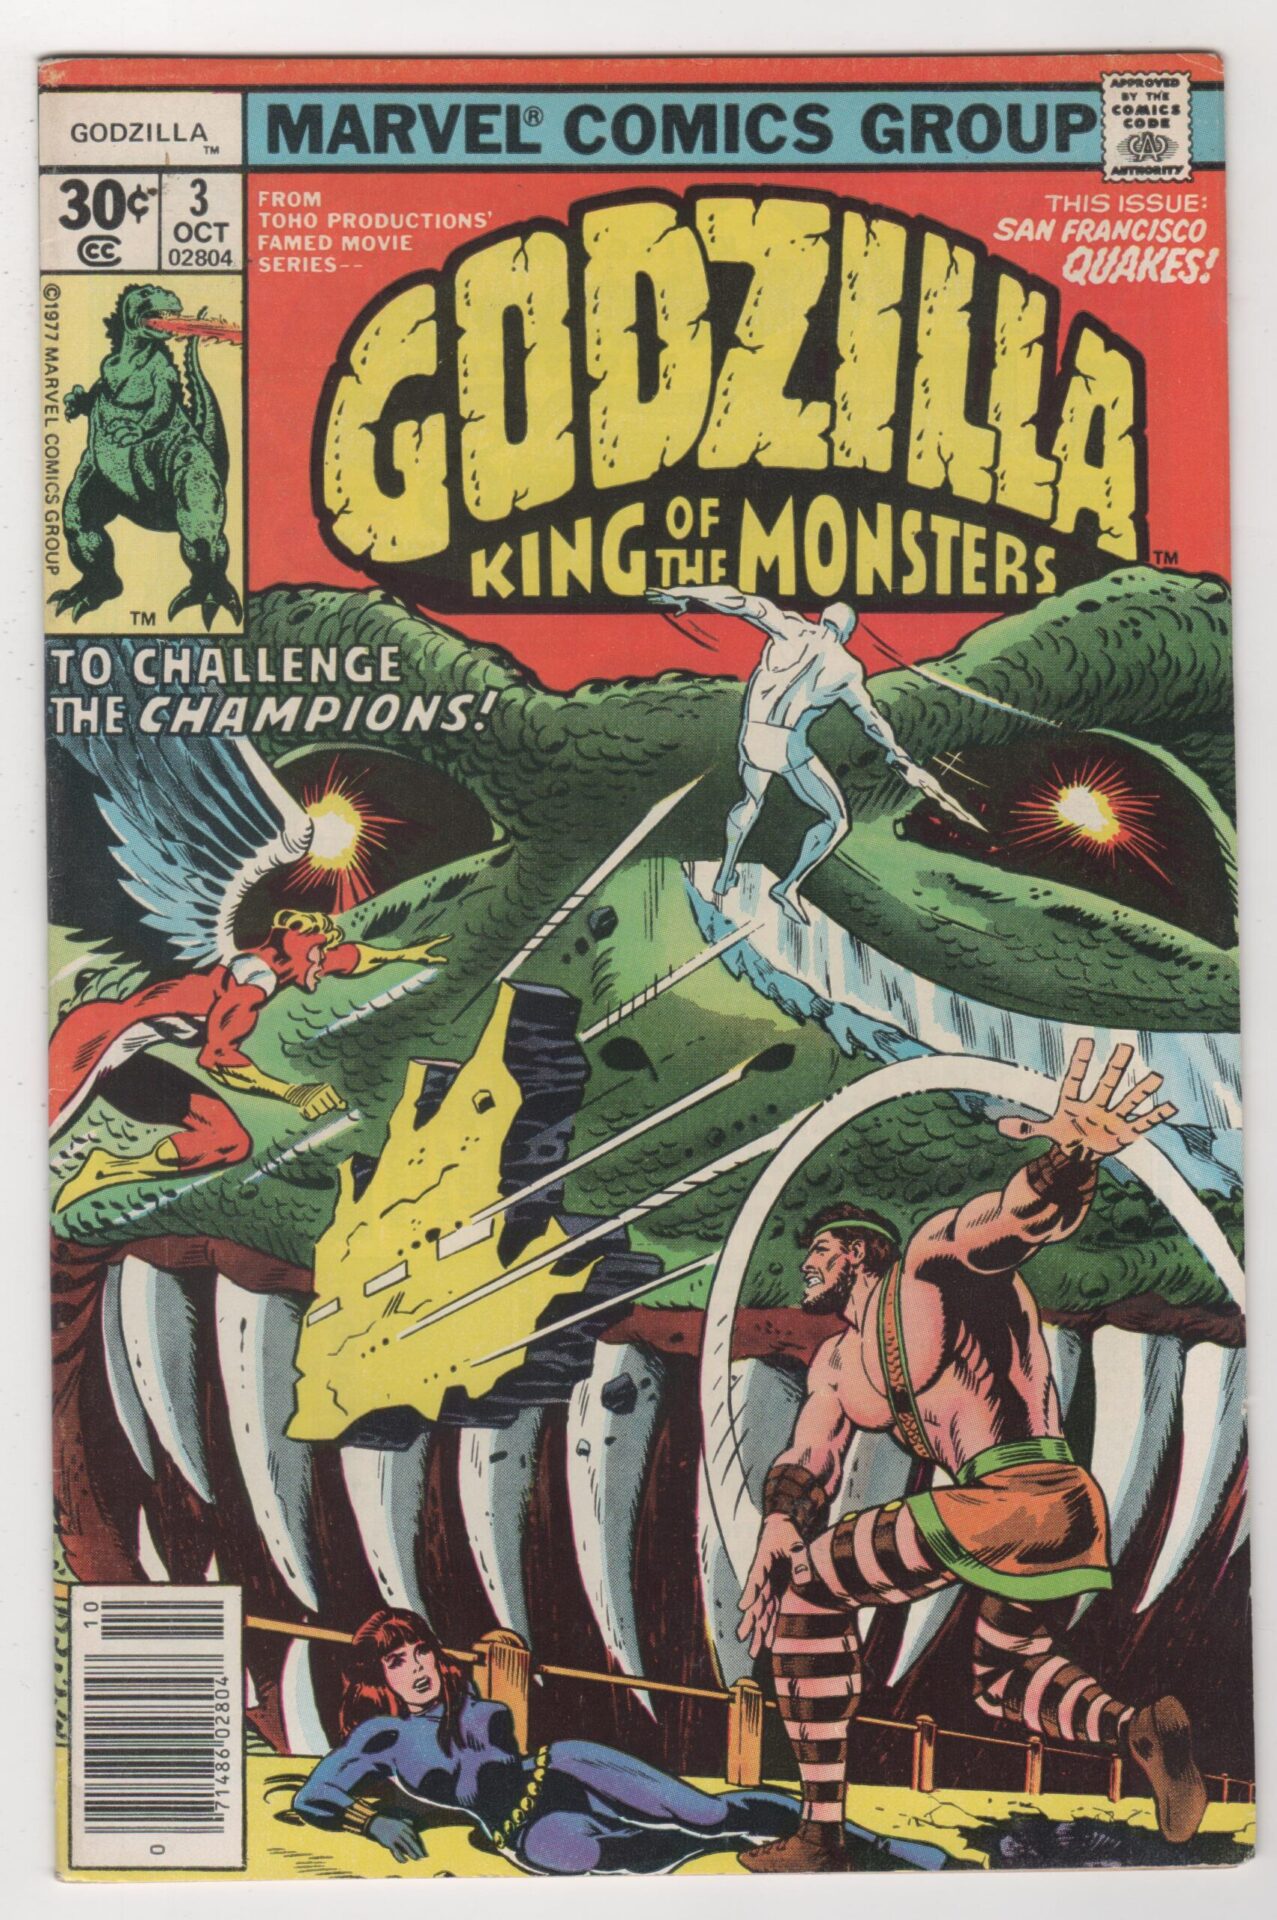 GODZILLA KING OF THE MONSTERS #3 Doug Moench and Herb Trimpe 1977 Marvel Comics